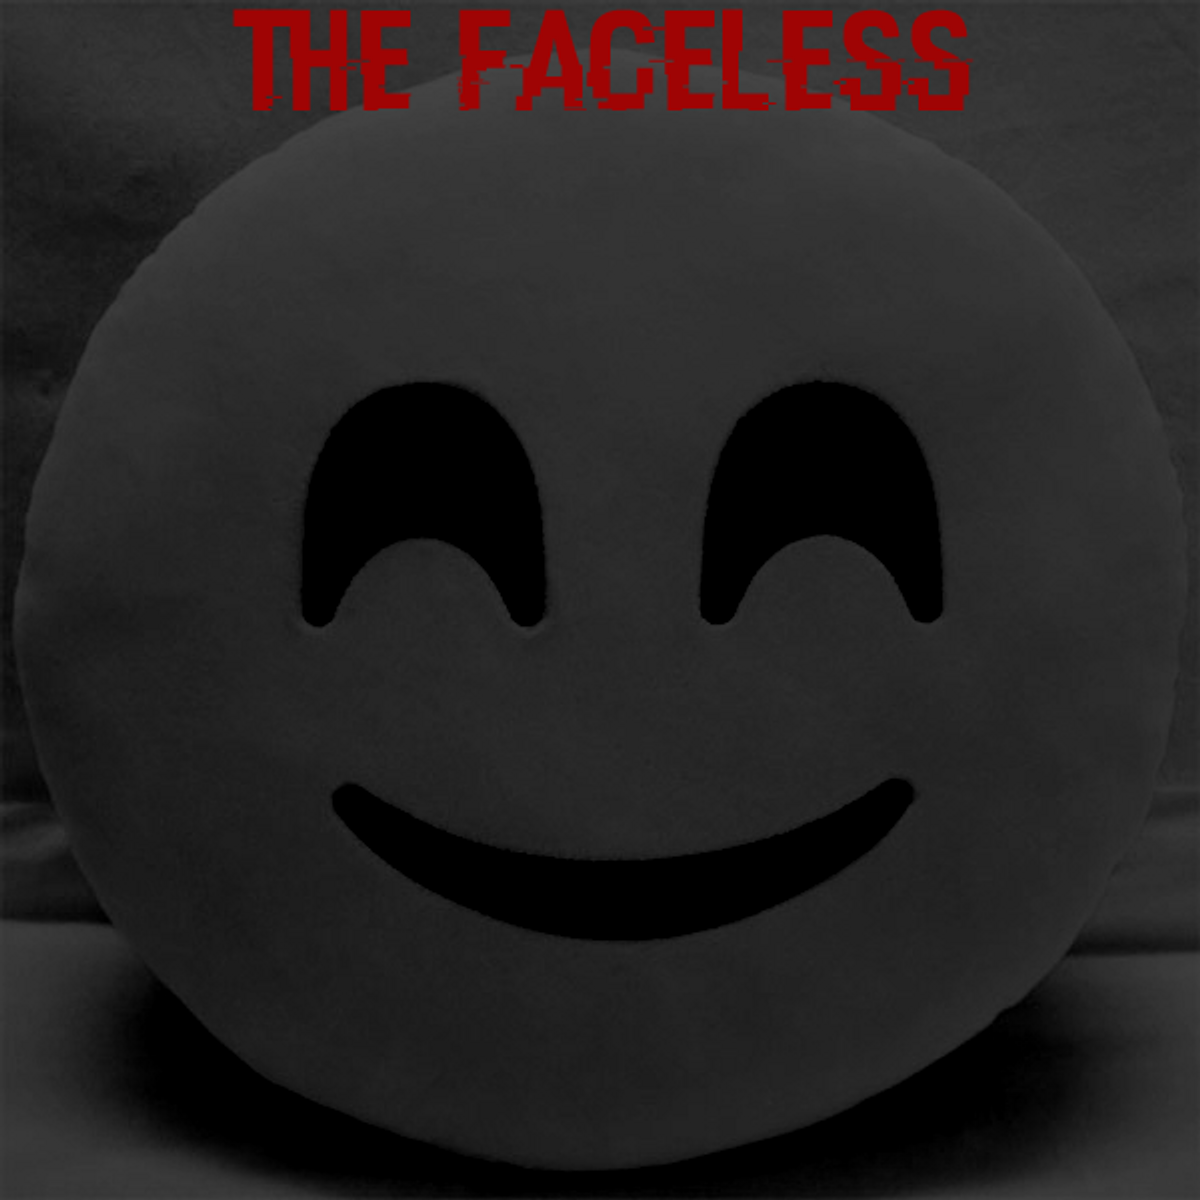 The Faceless